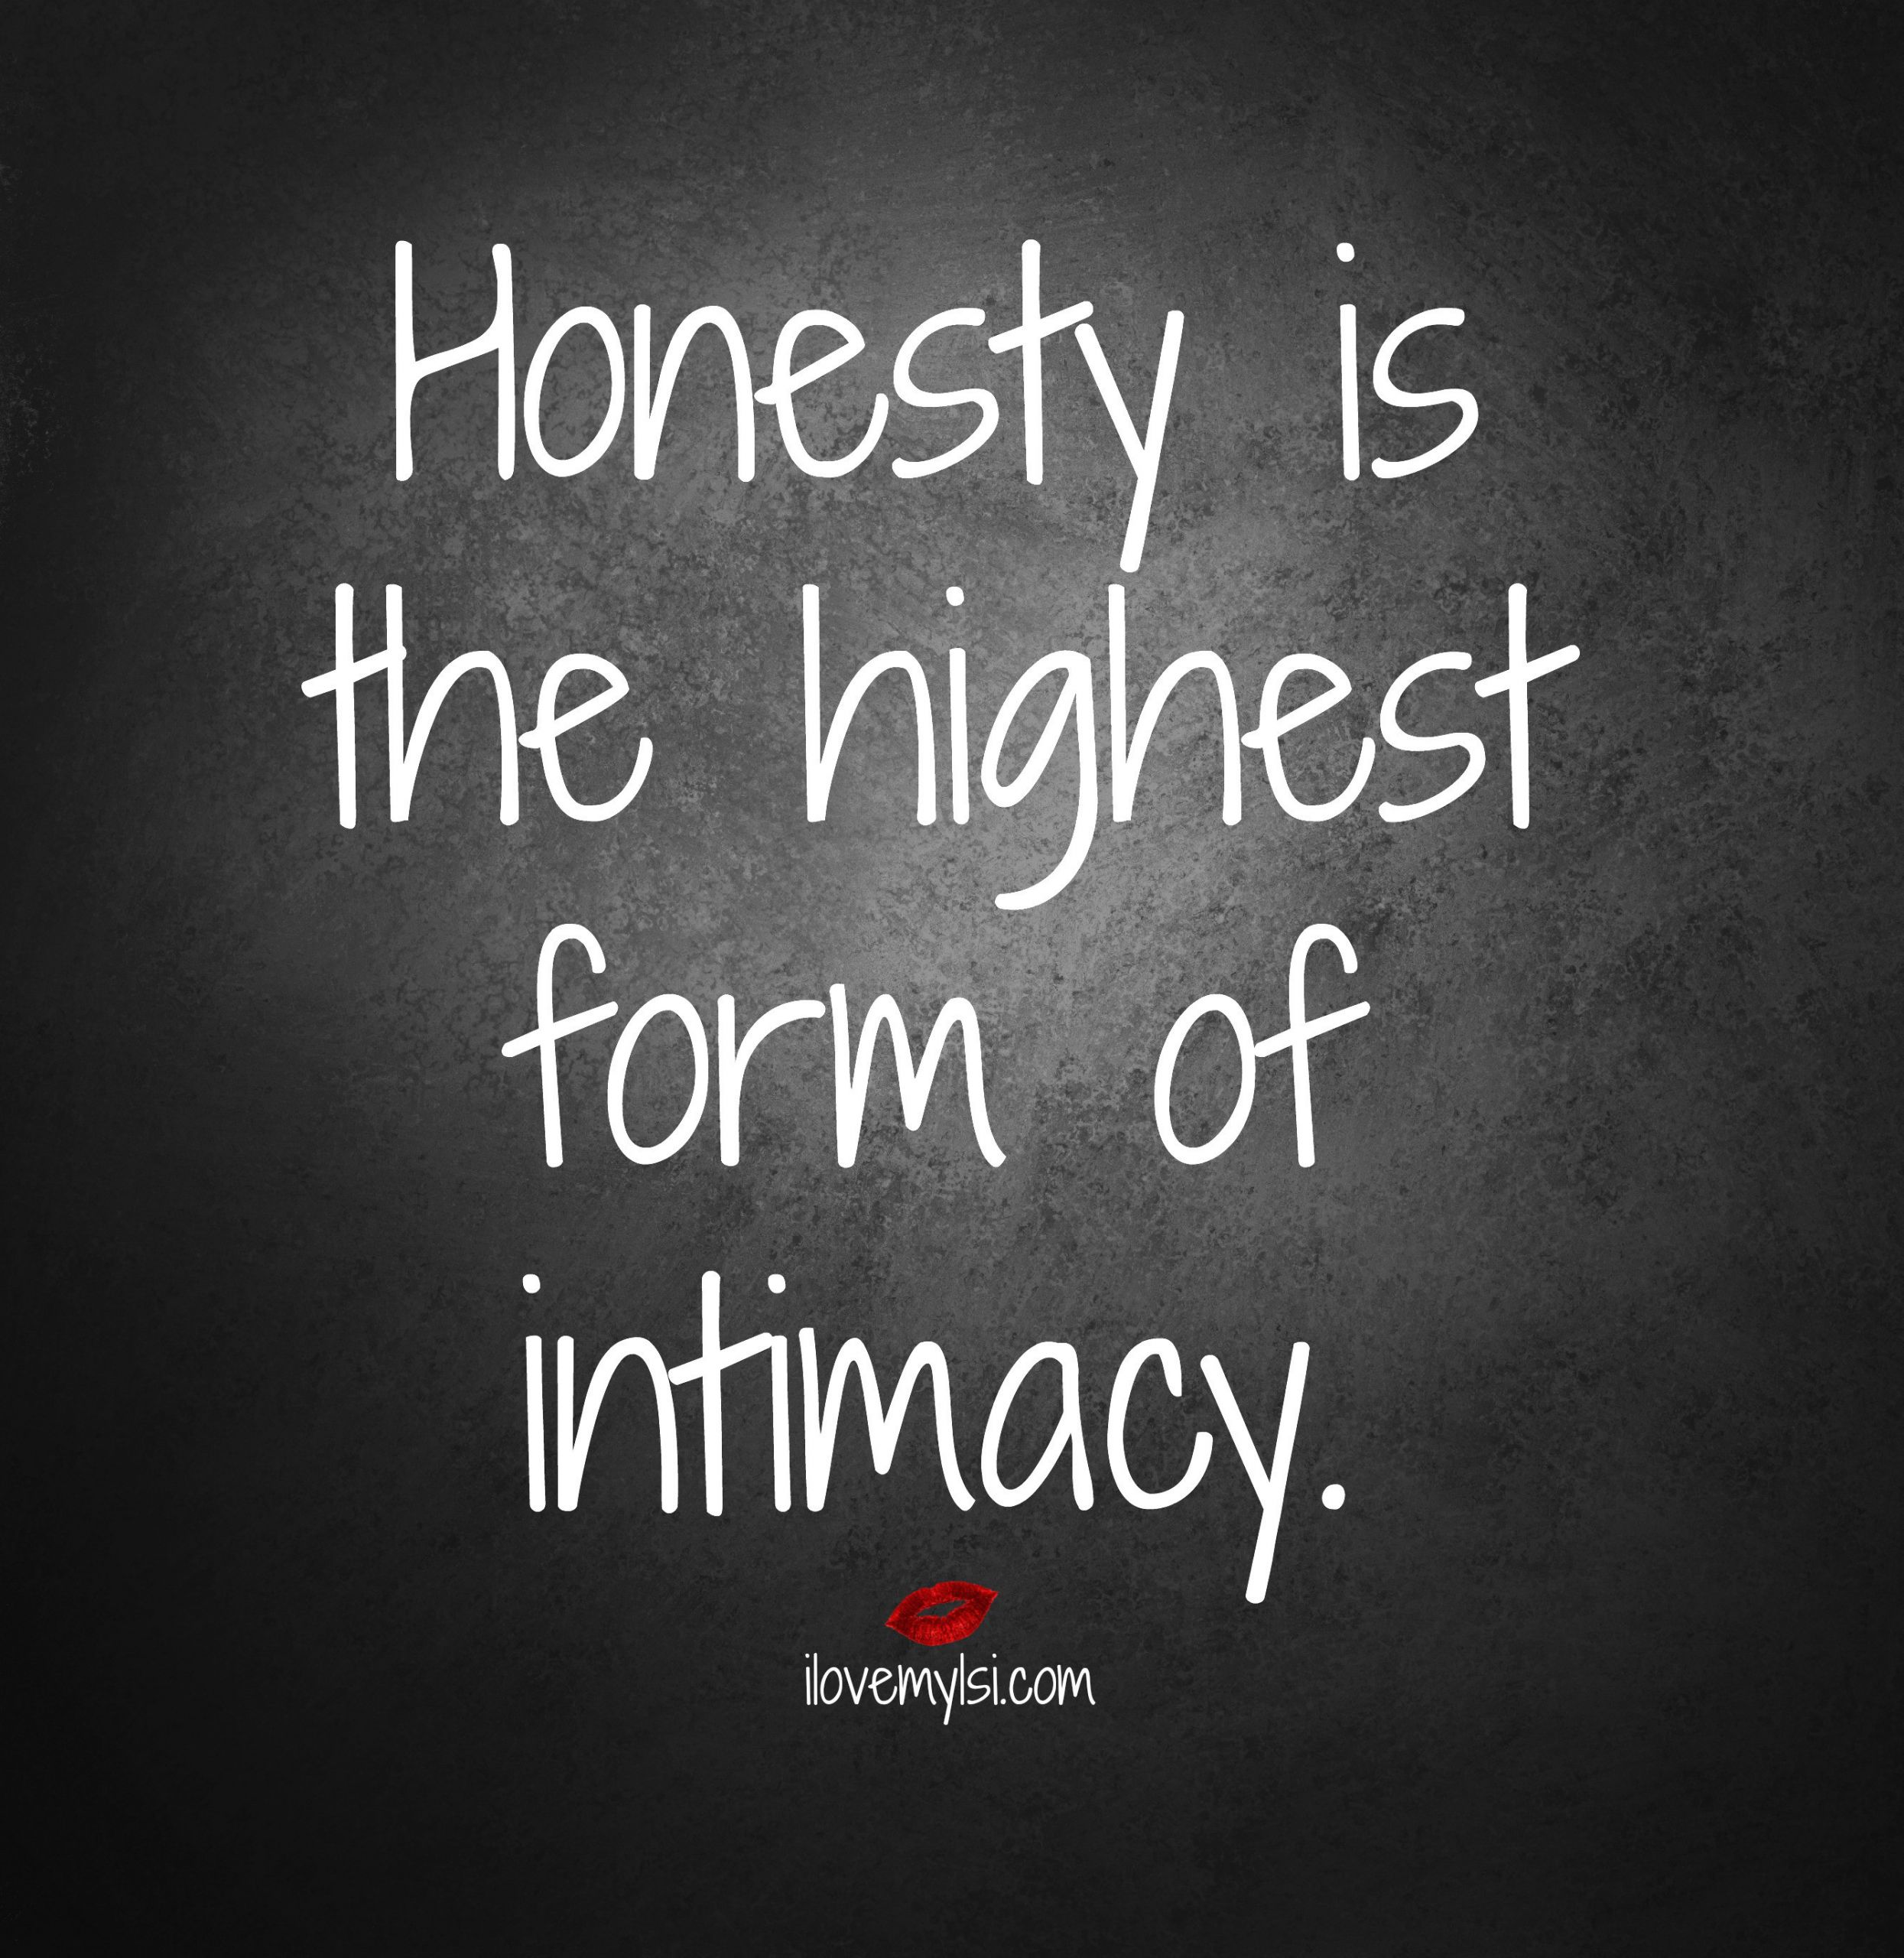 Truth Quotes About Relationships
 Quotes About Honesty In Relationships QuotesGram